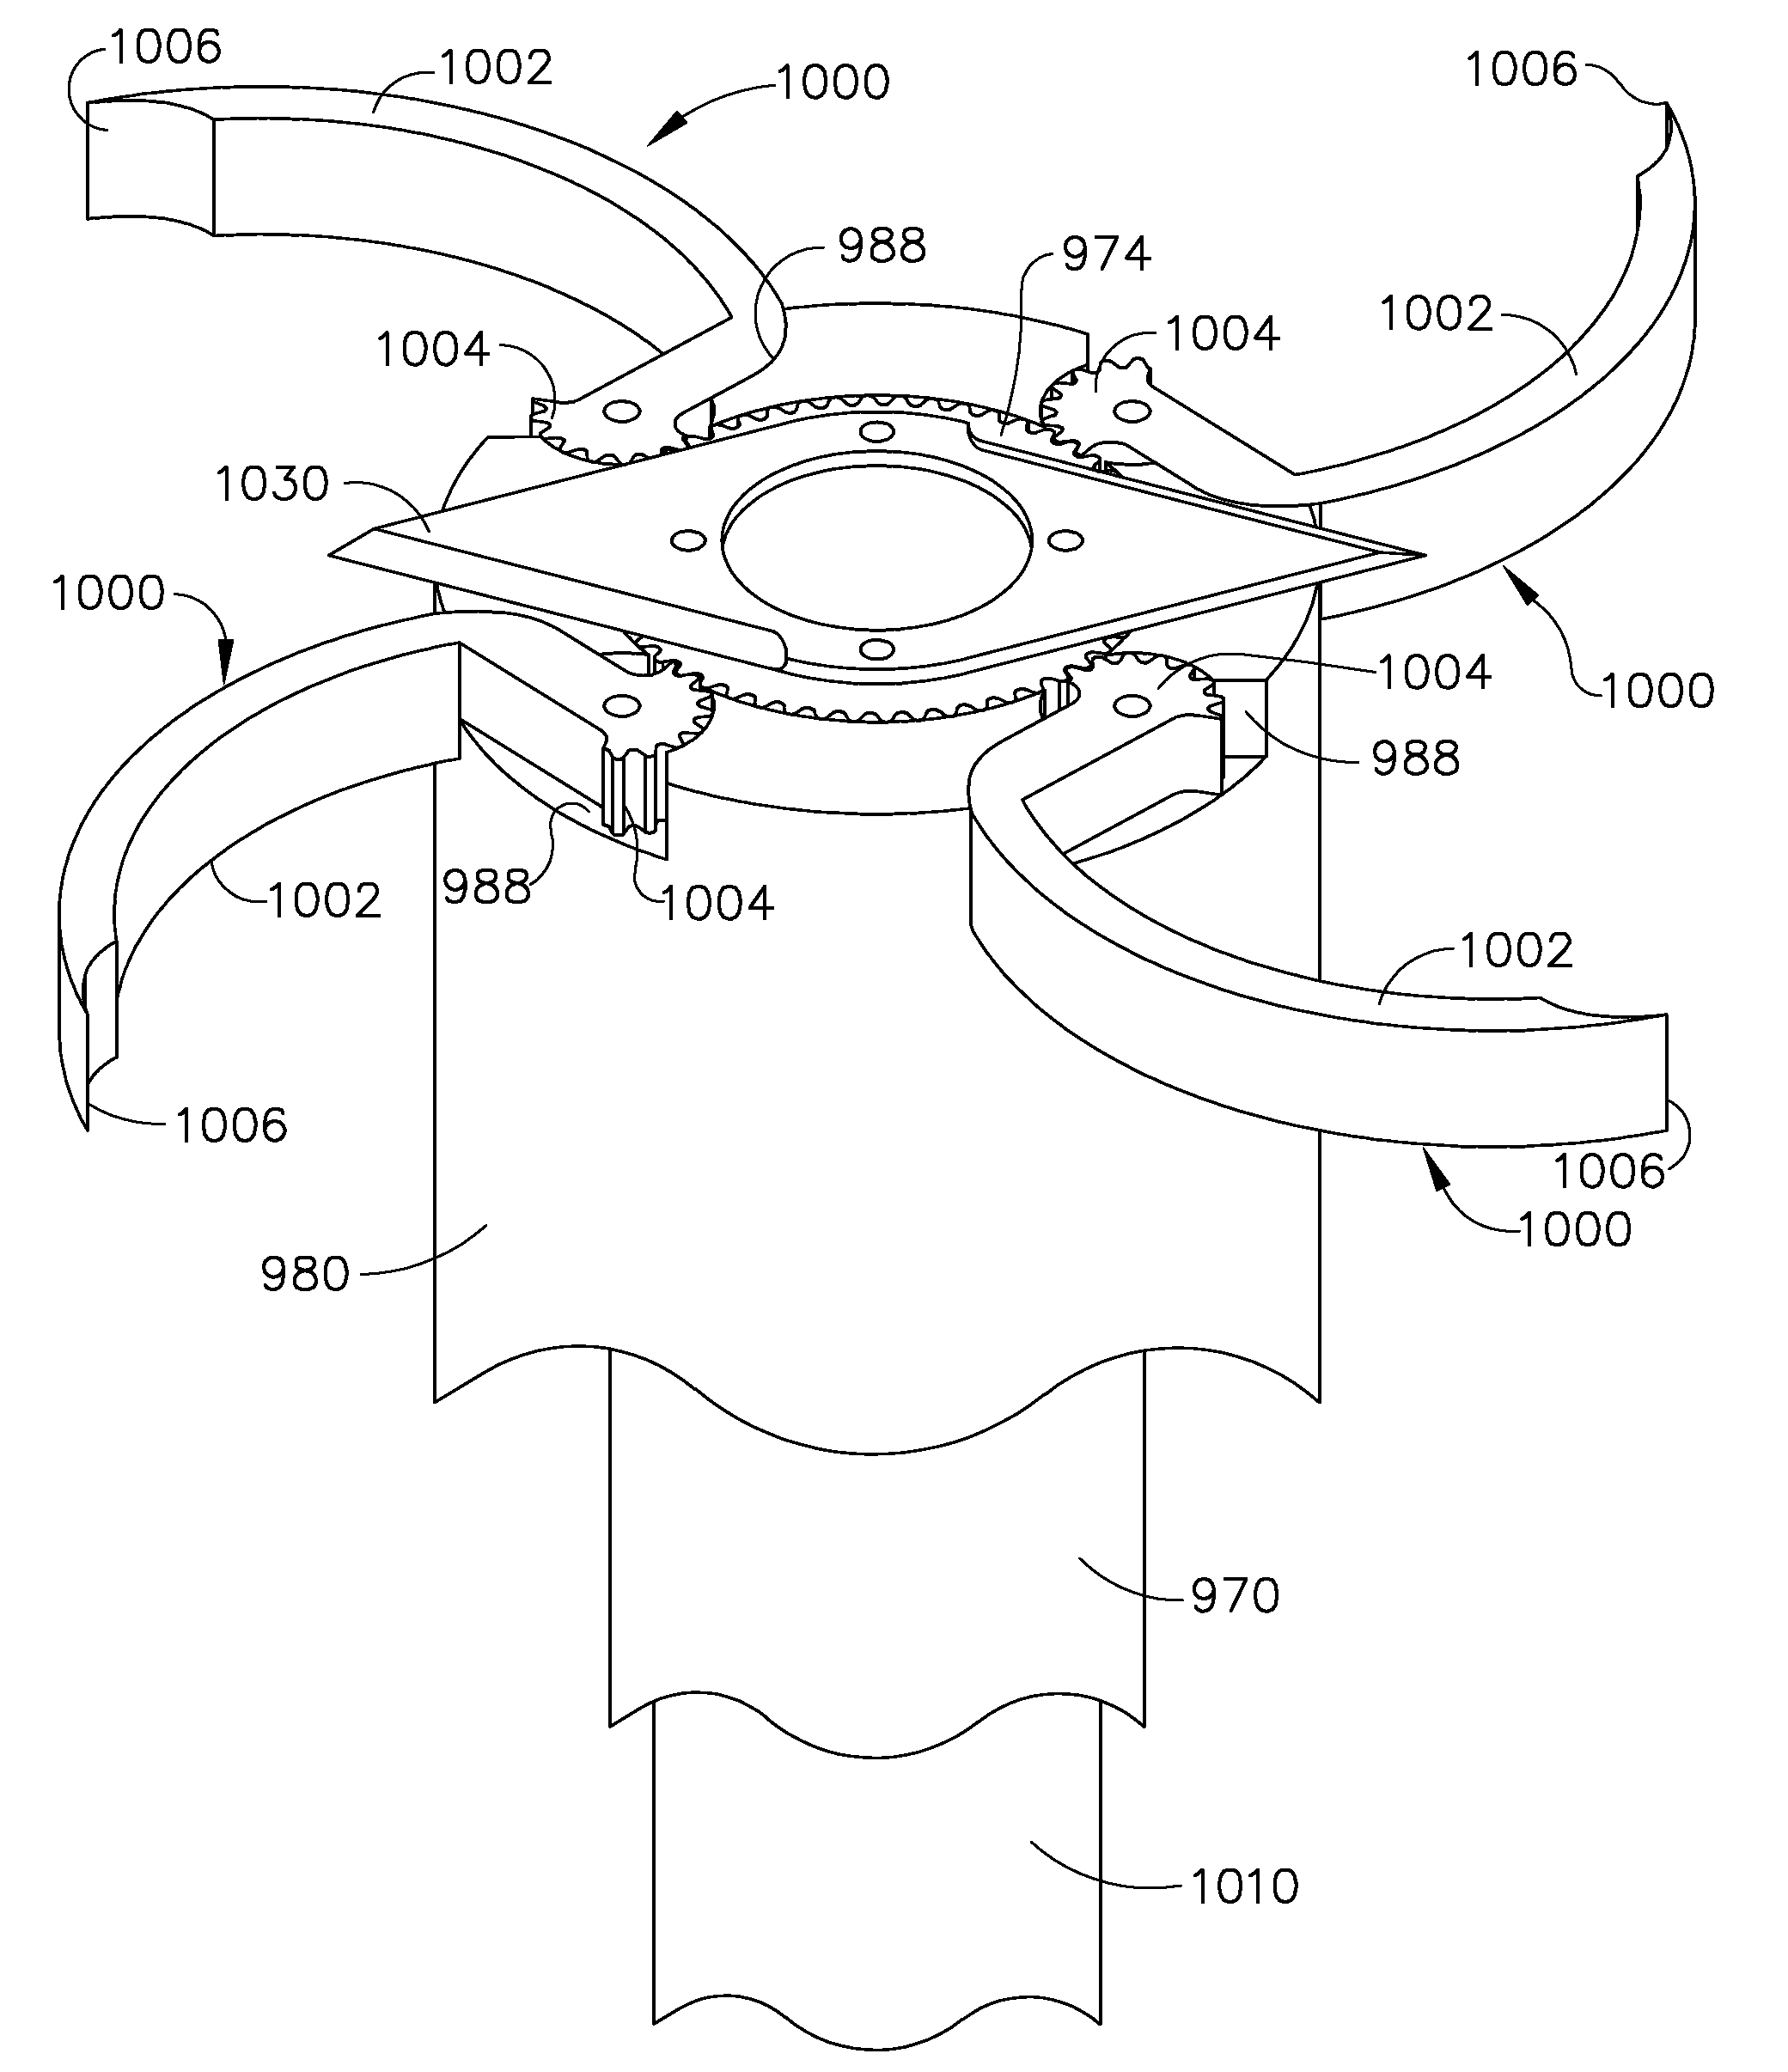 Transwall visualization arrangements and methods for surgical circular staplers